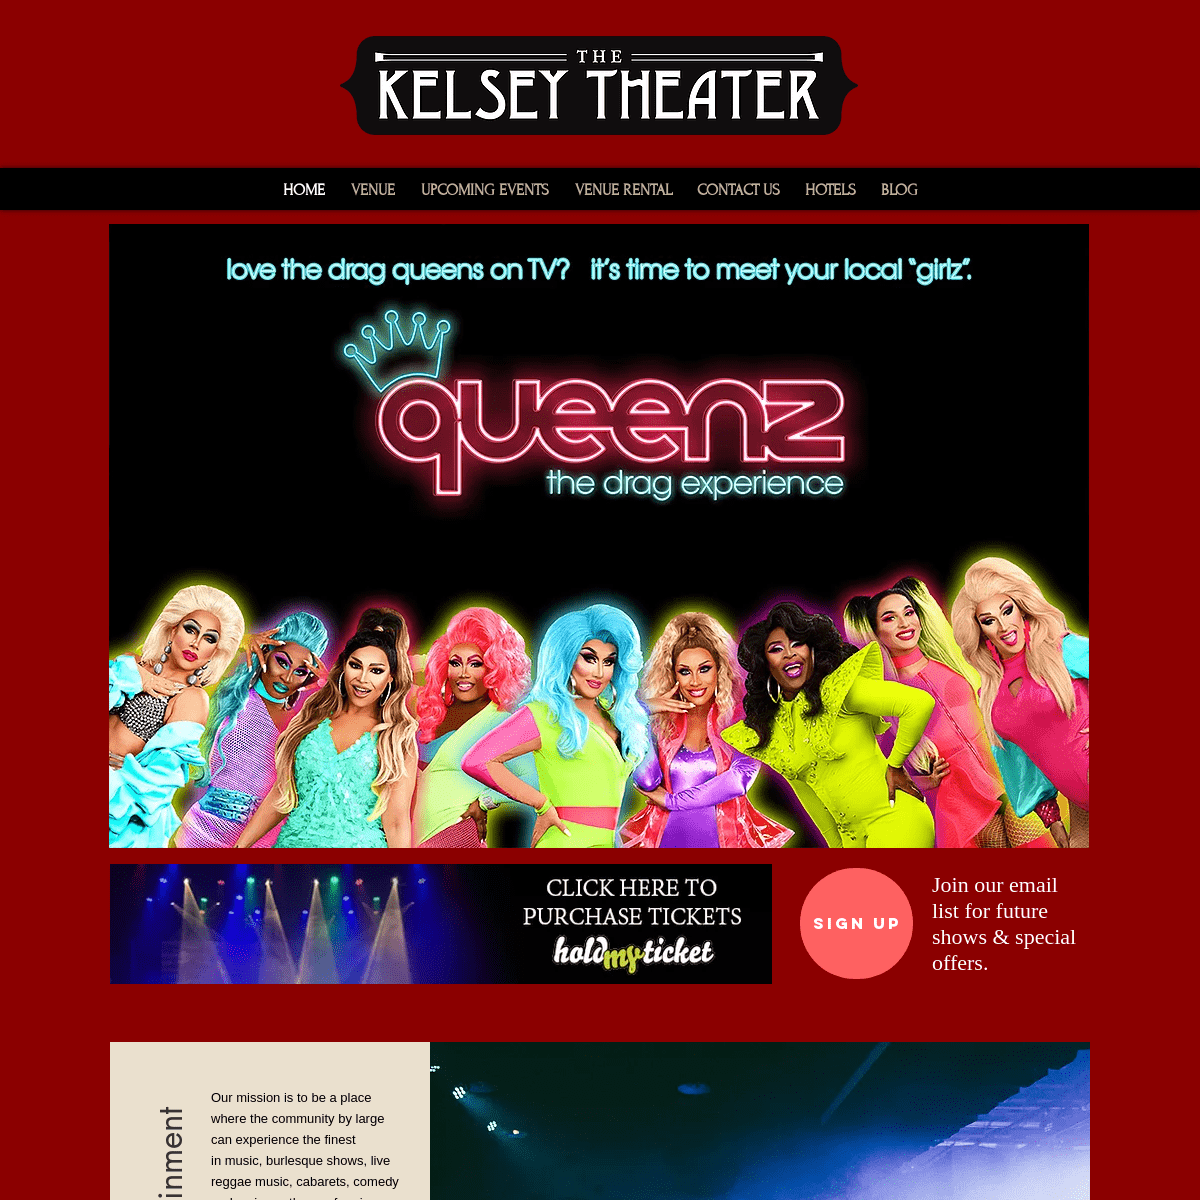 A complete backup of thekelseytheater.com